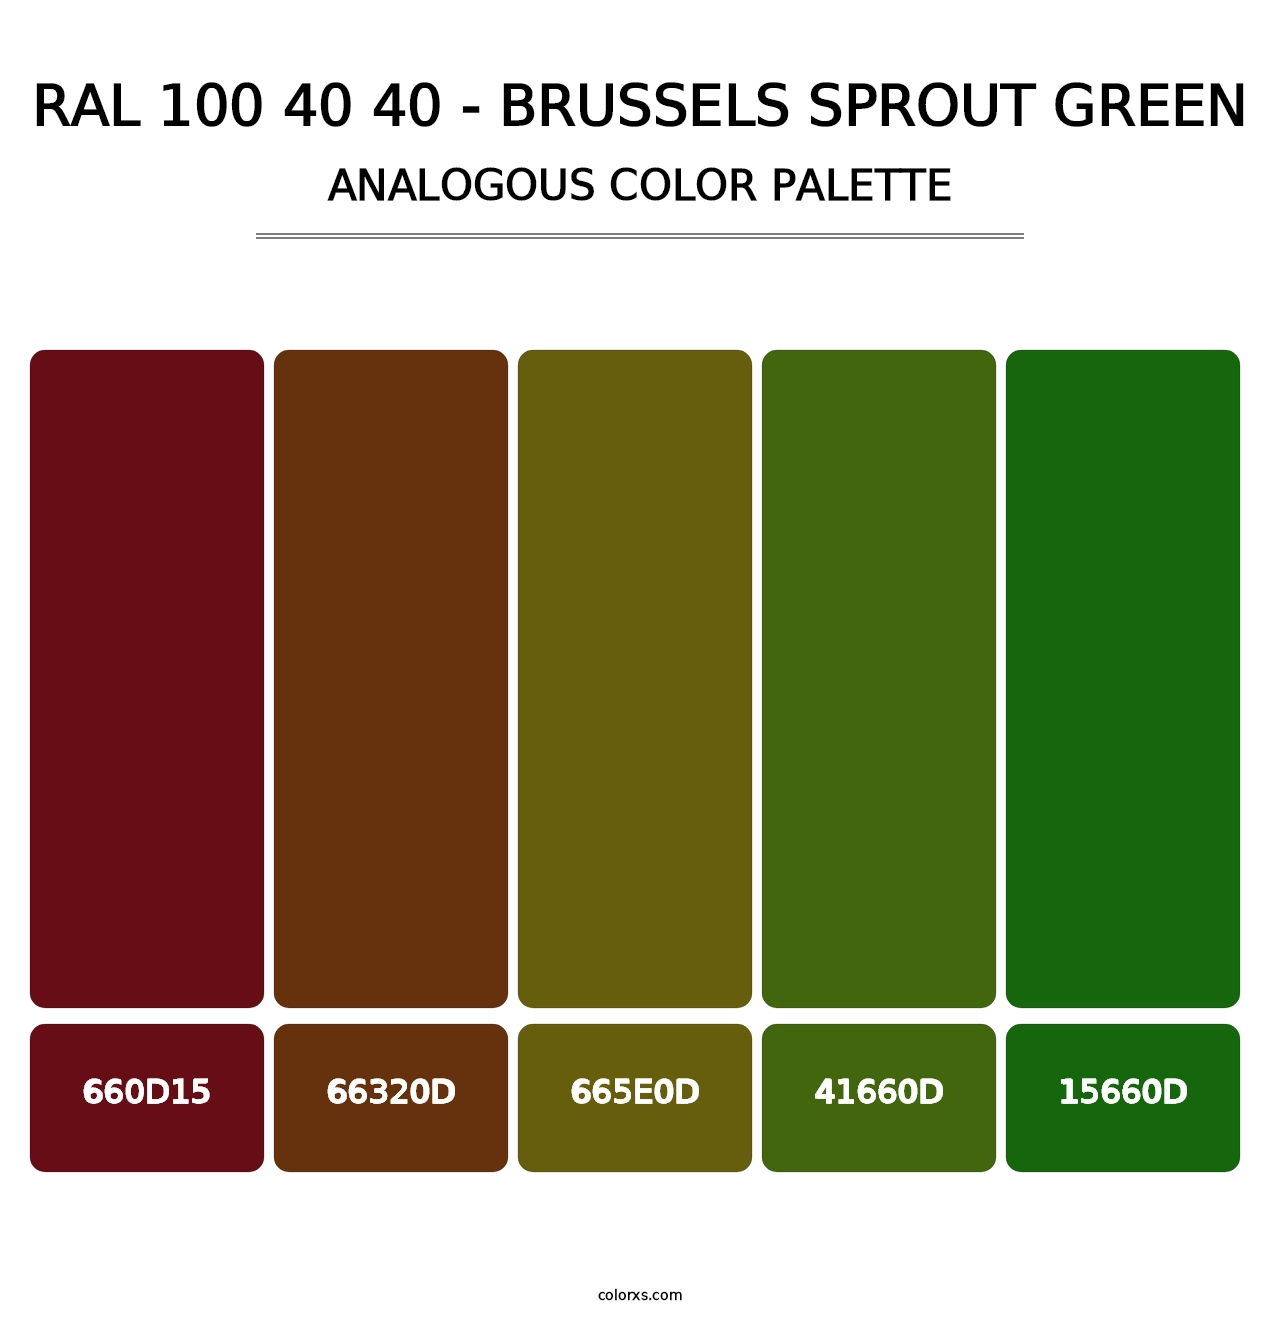 RAL 100 40 40 - Brussels Sprout Green - Analogous Color Palette